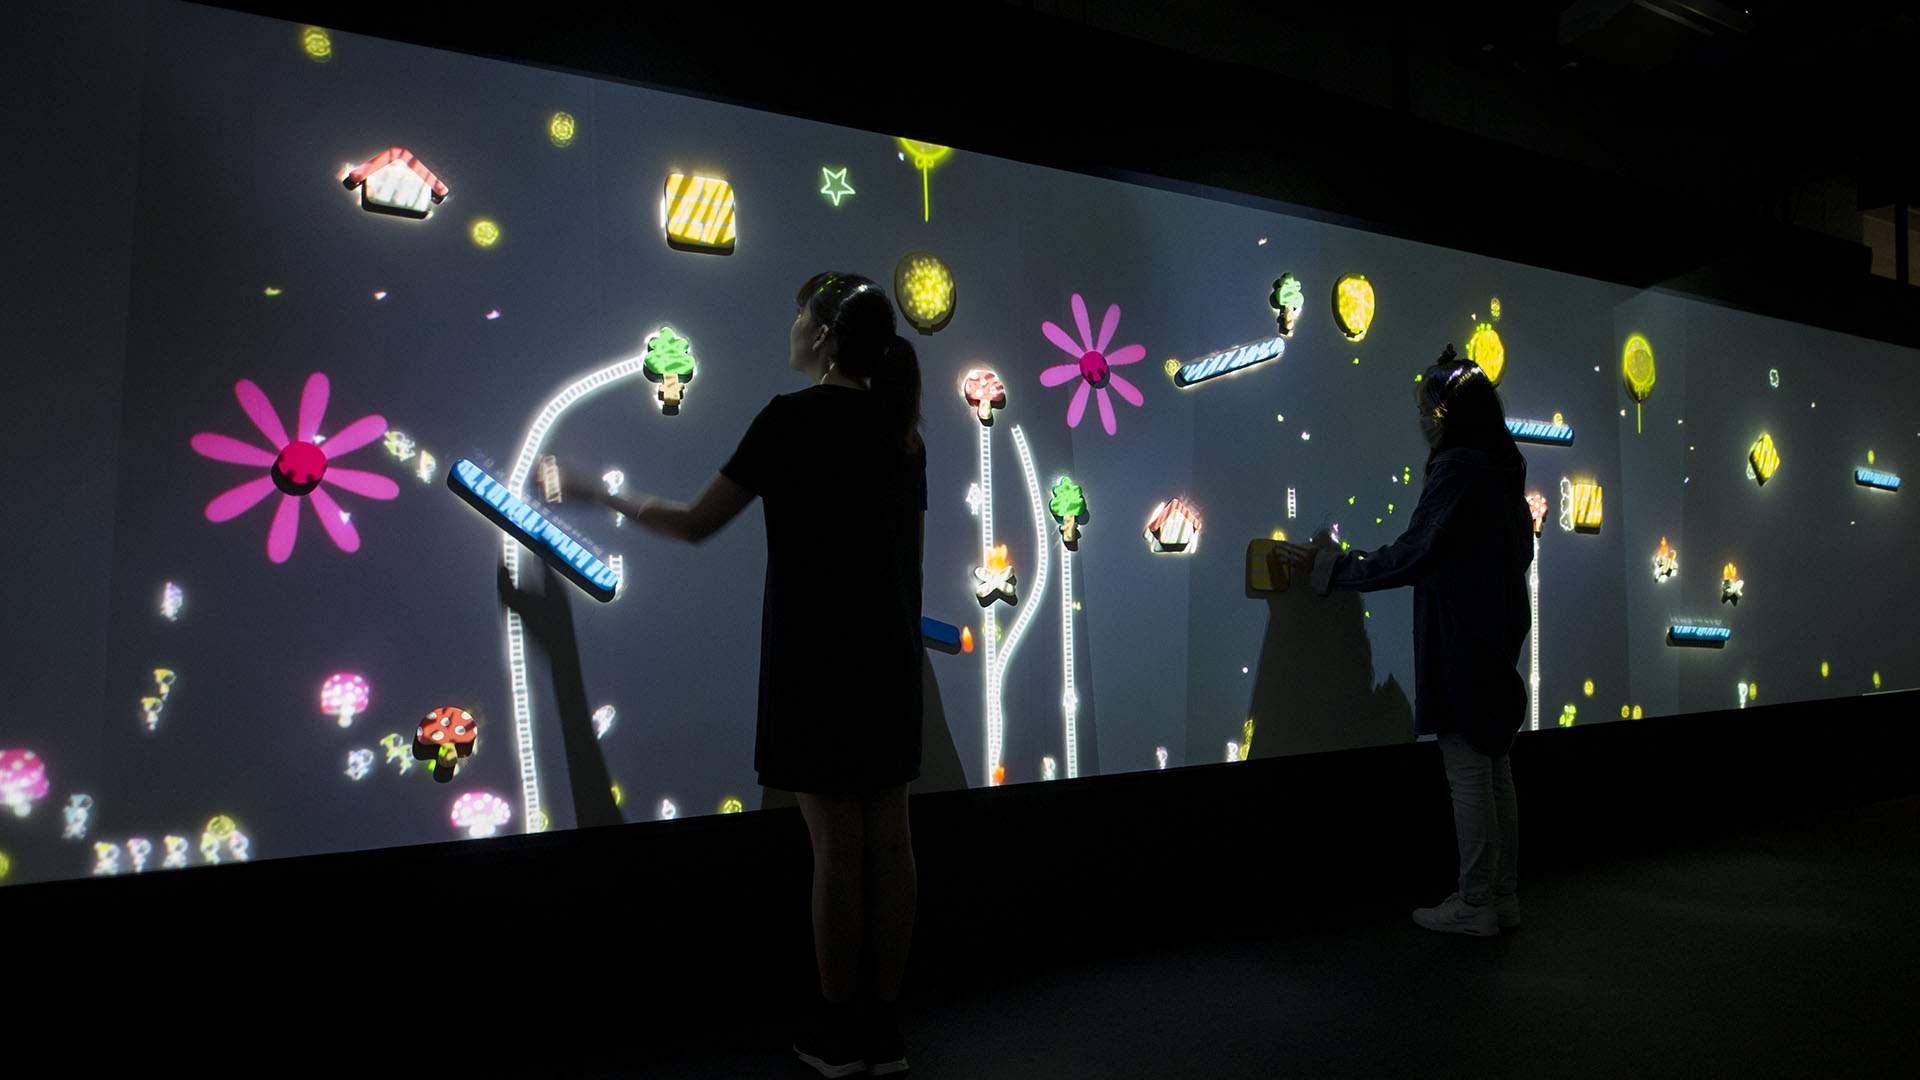 Japan's Kaleidoscopic New Digital-Only Art Museum Is Your Next Reason to Visit Tokyo